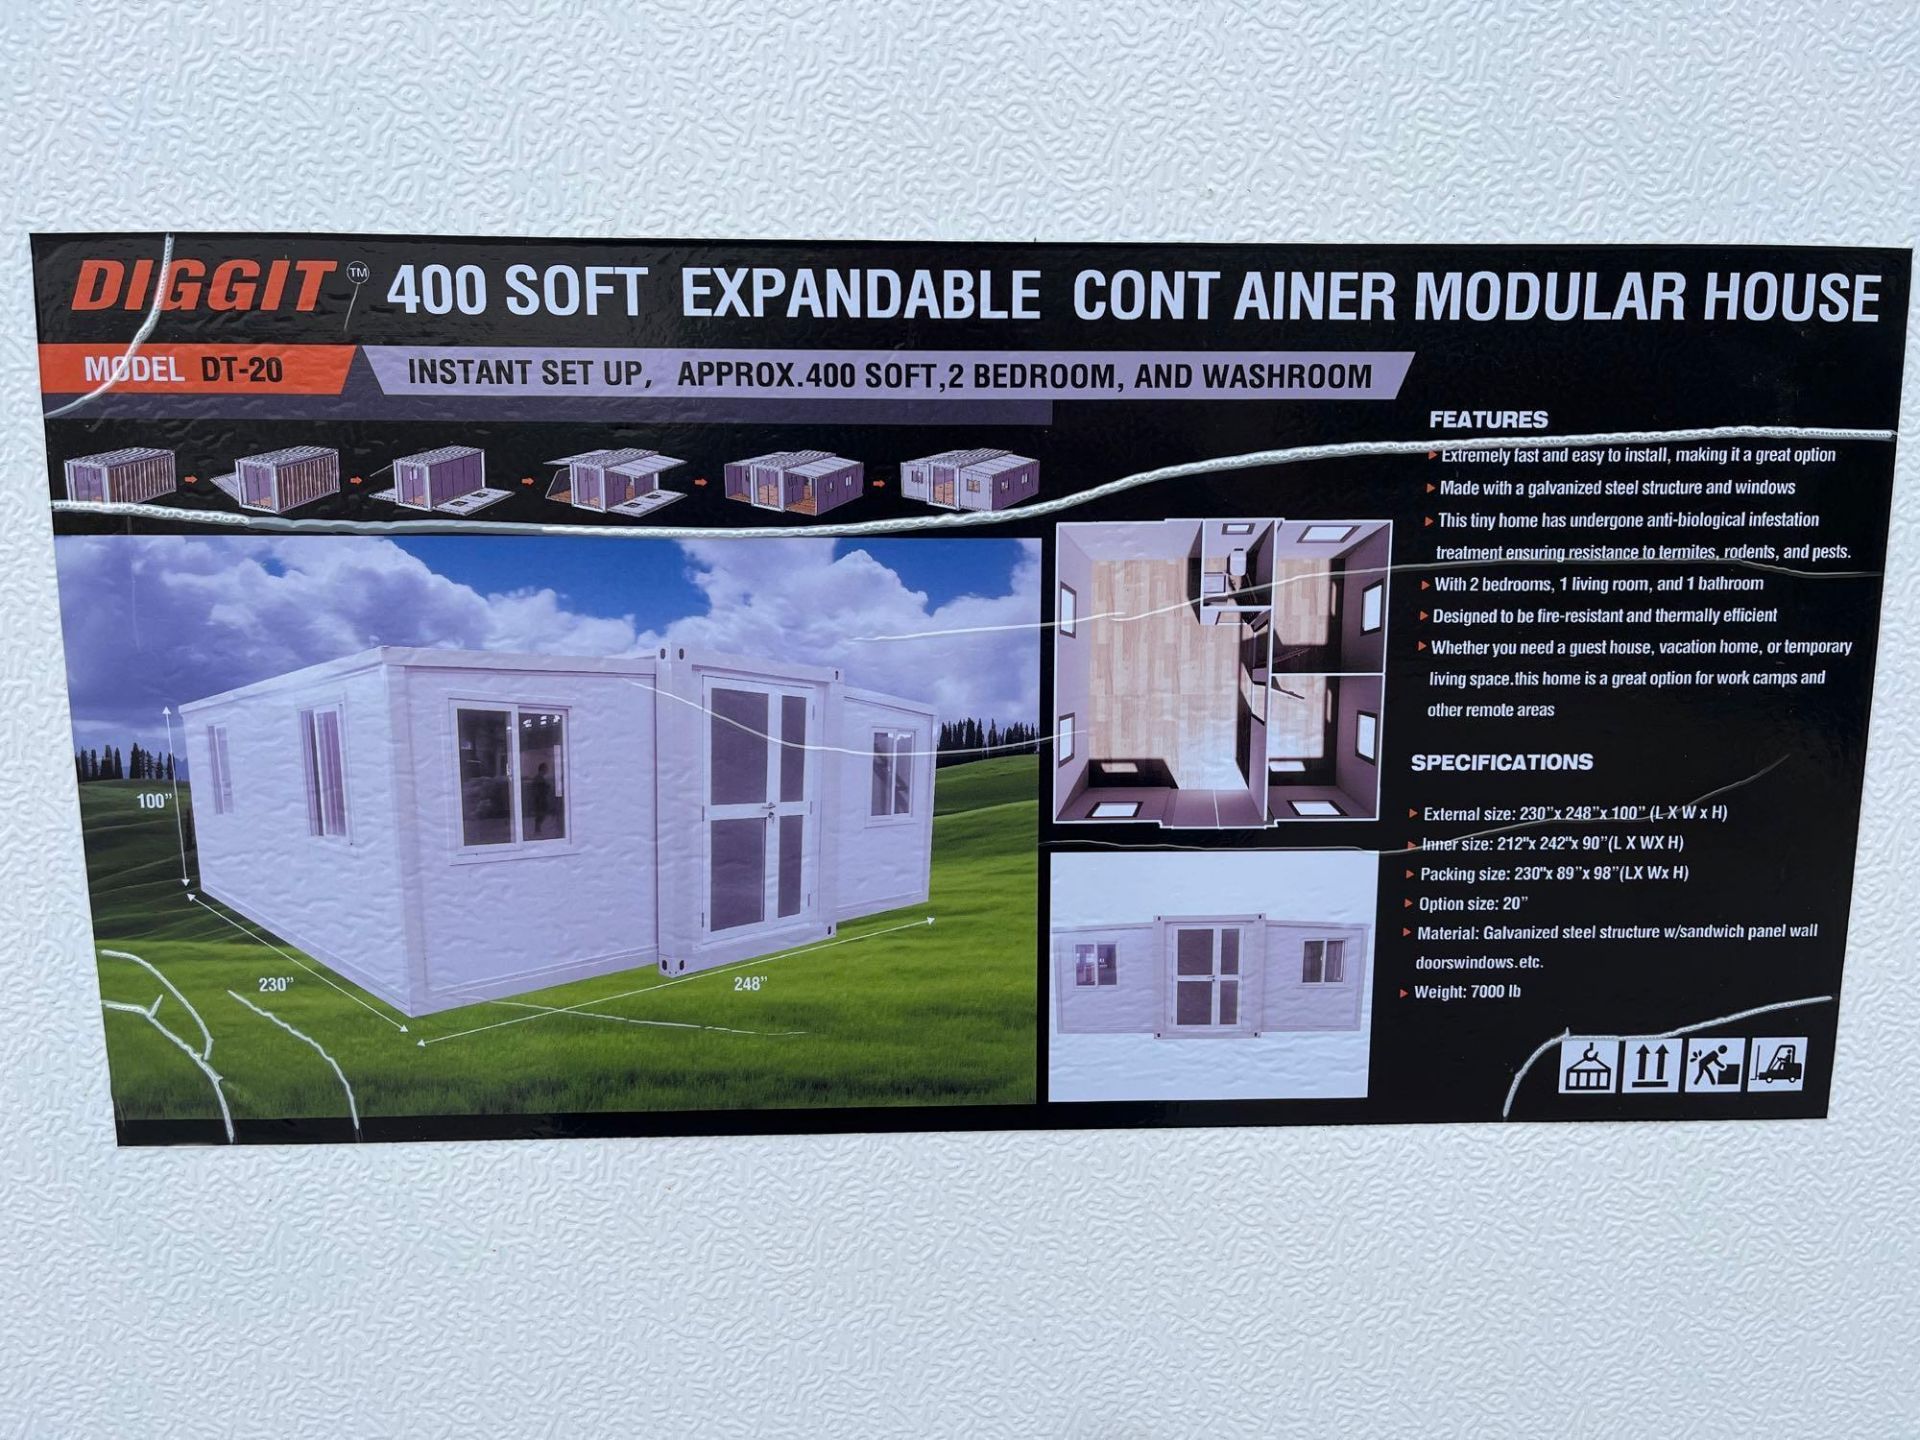 Diggit DT-20 Expandable, 2 Bedroom Modular House - Image 5 of 11